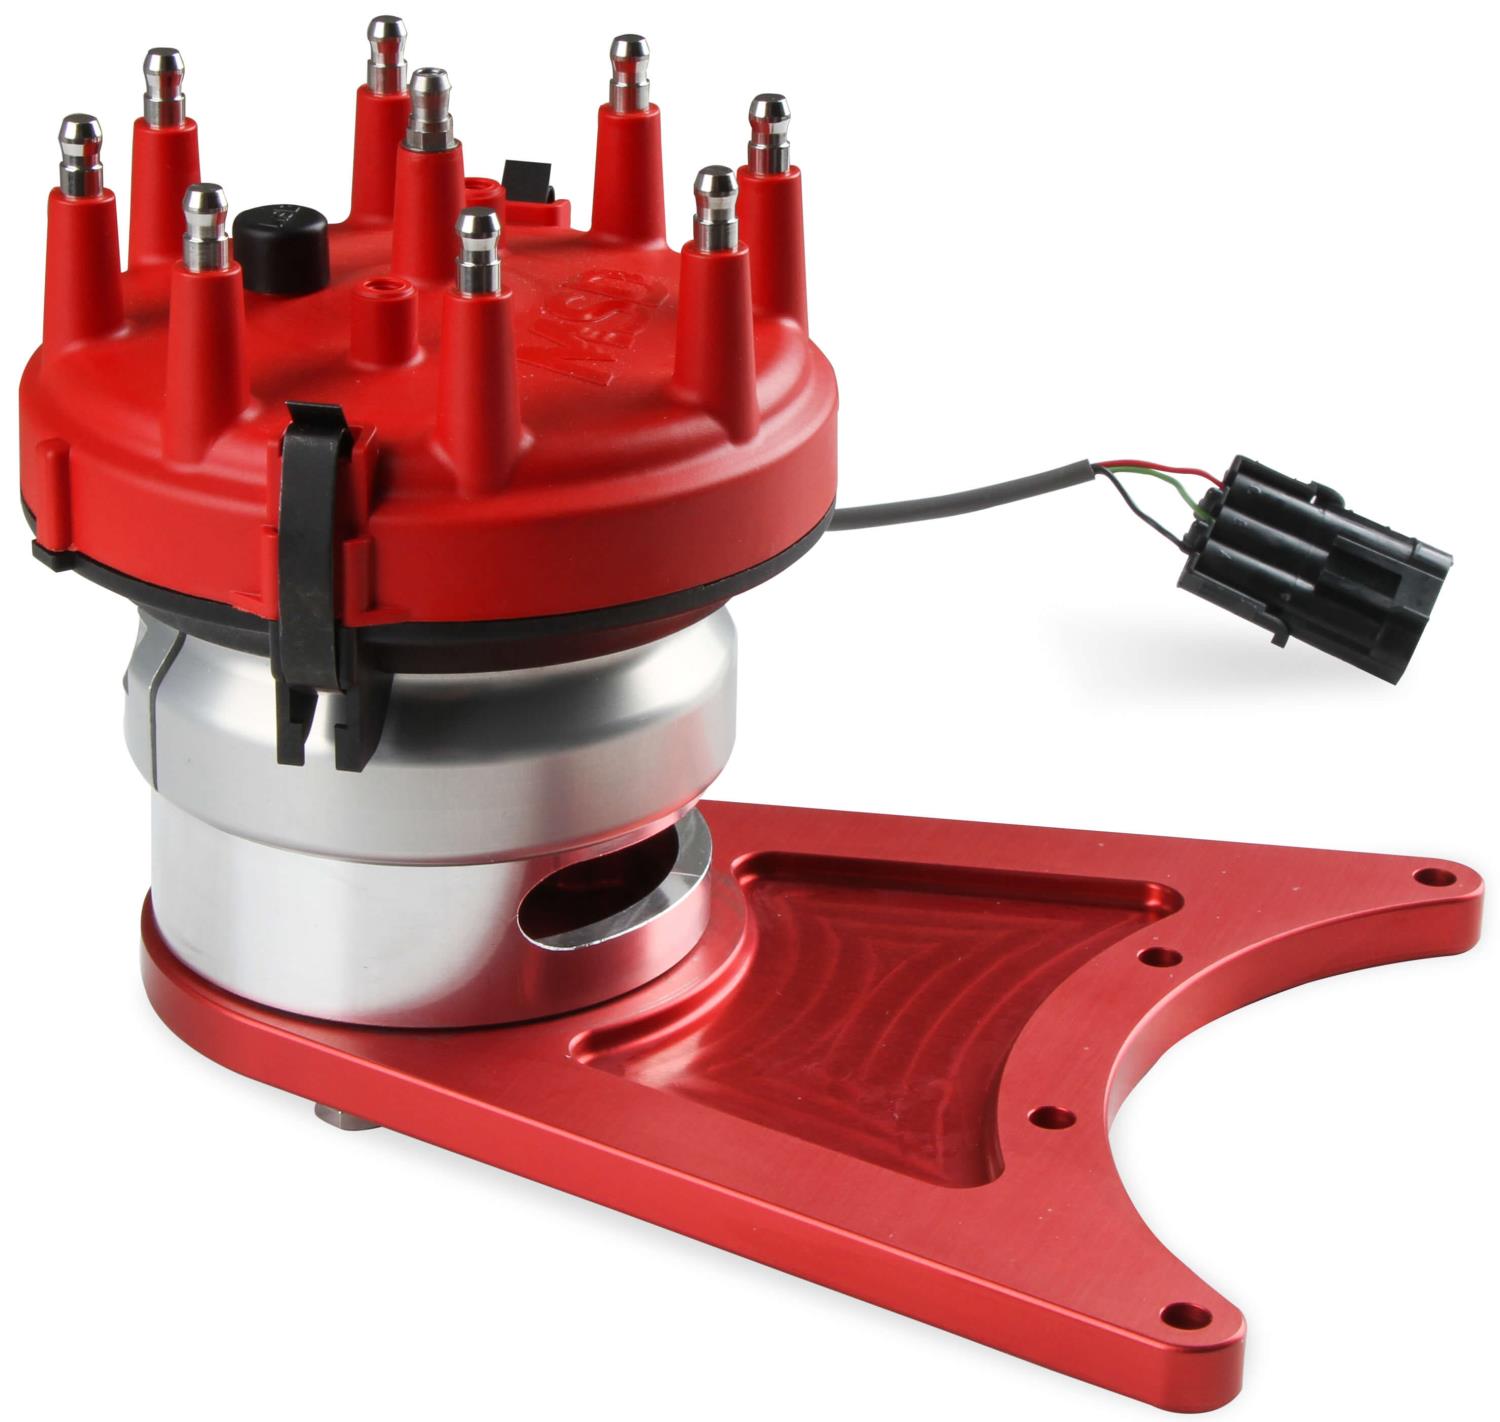 Msd Pro Billet Front Drive Distributor W Adjustable Hall Effect Sync Pickup For Small Block Chevy Red Hei Cap Jegs